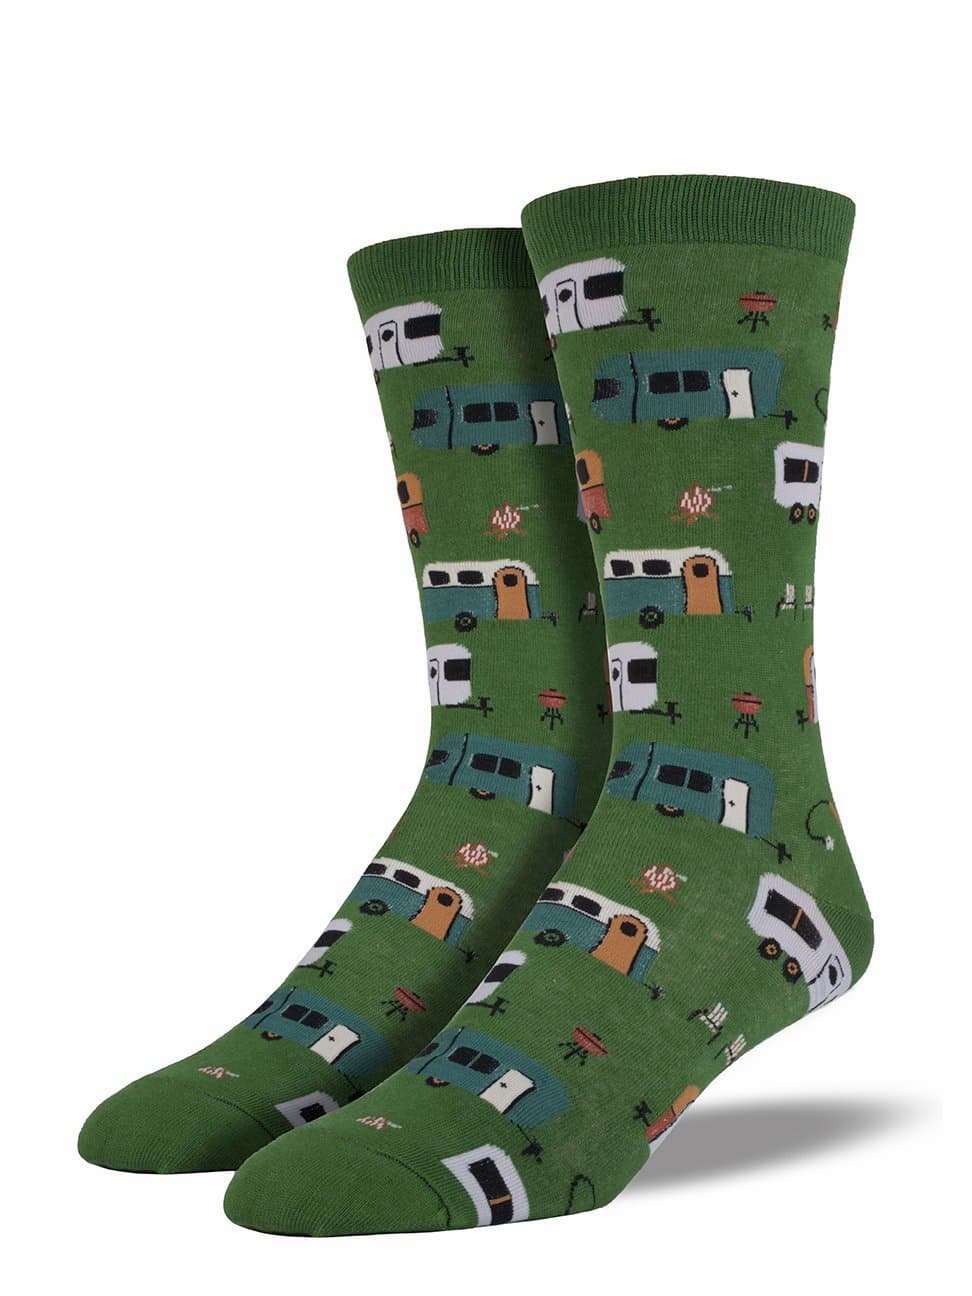 Mens cotton crew socks in grass green with a design with campervans